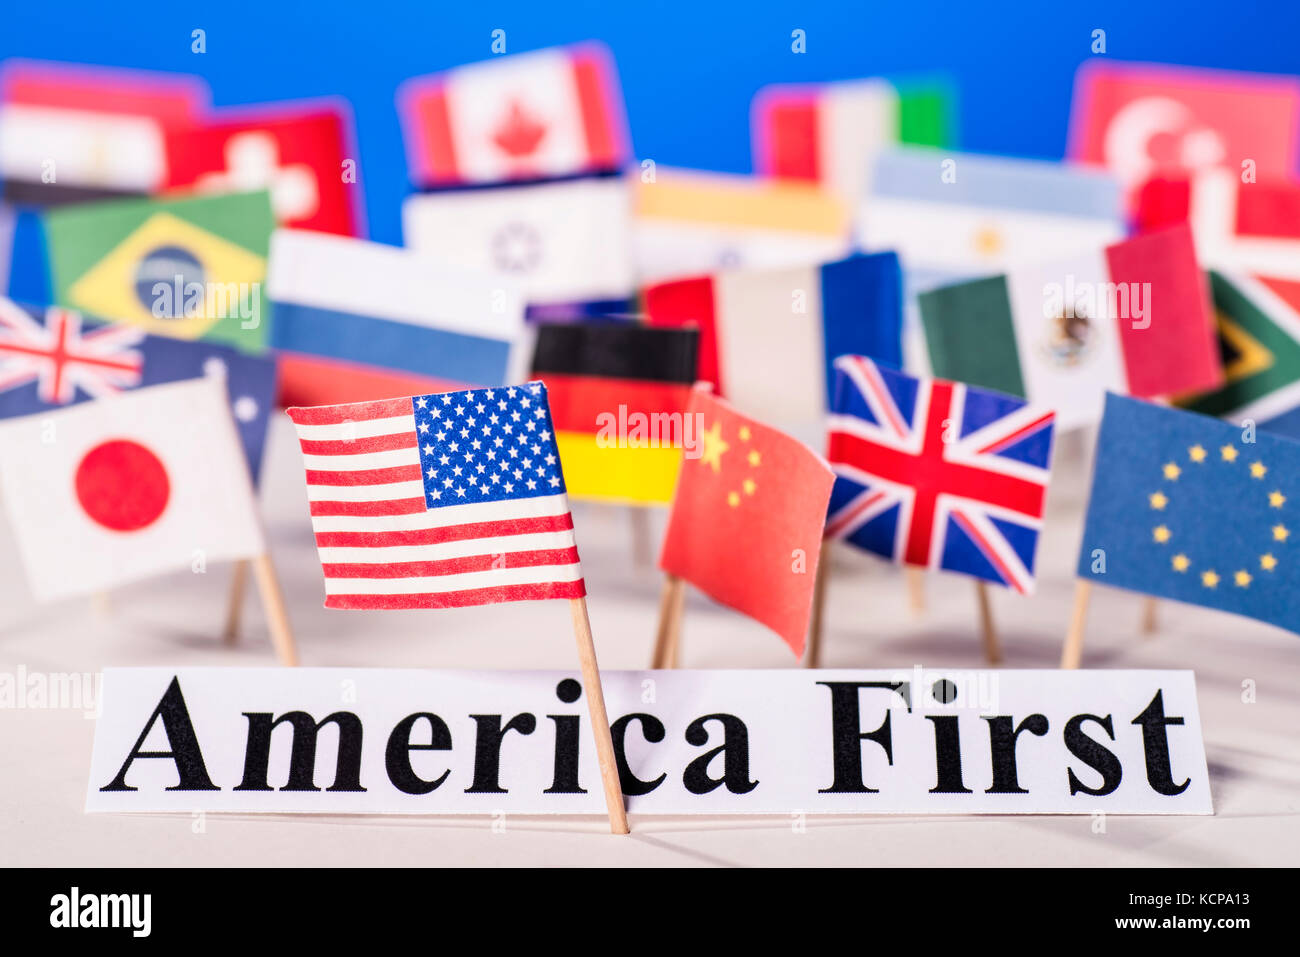 American flag is in front of the slogan America First and many flags of other countries. Stock Photo